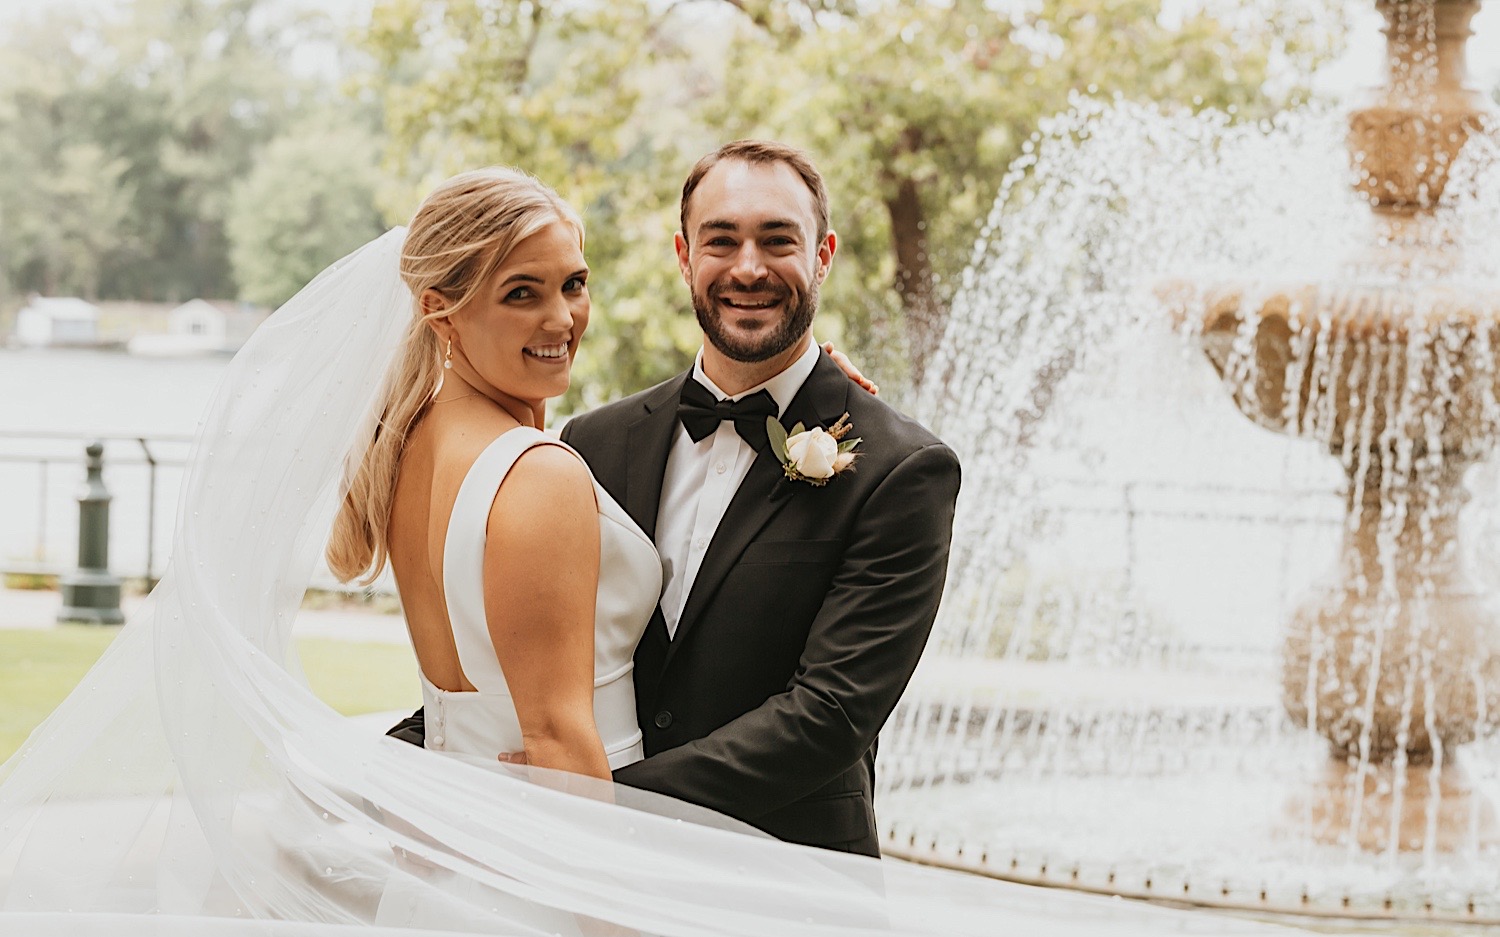 Portrait of a bride and groom smiling at the camera while embracing in front of a fountain